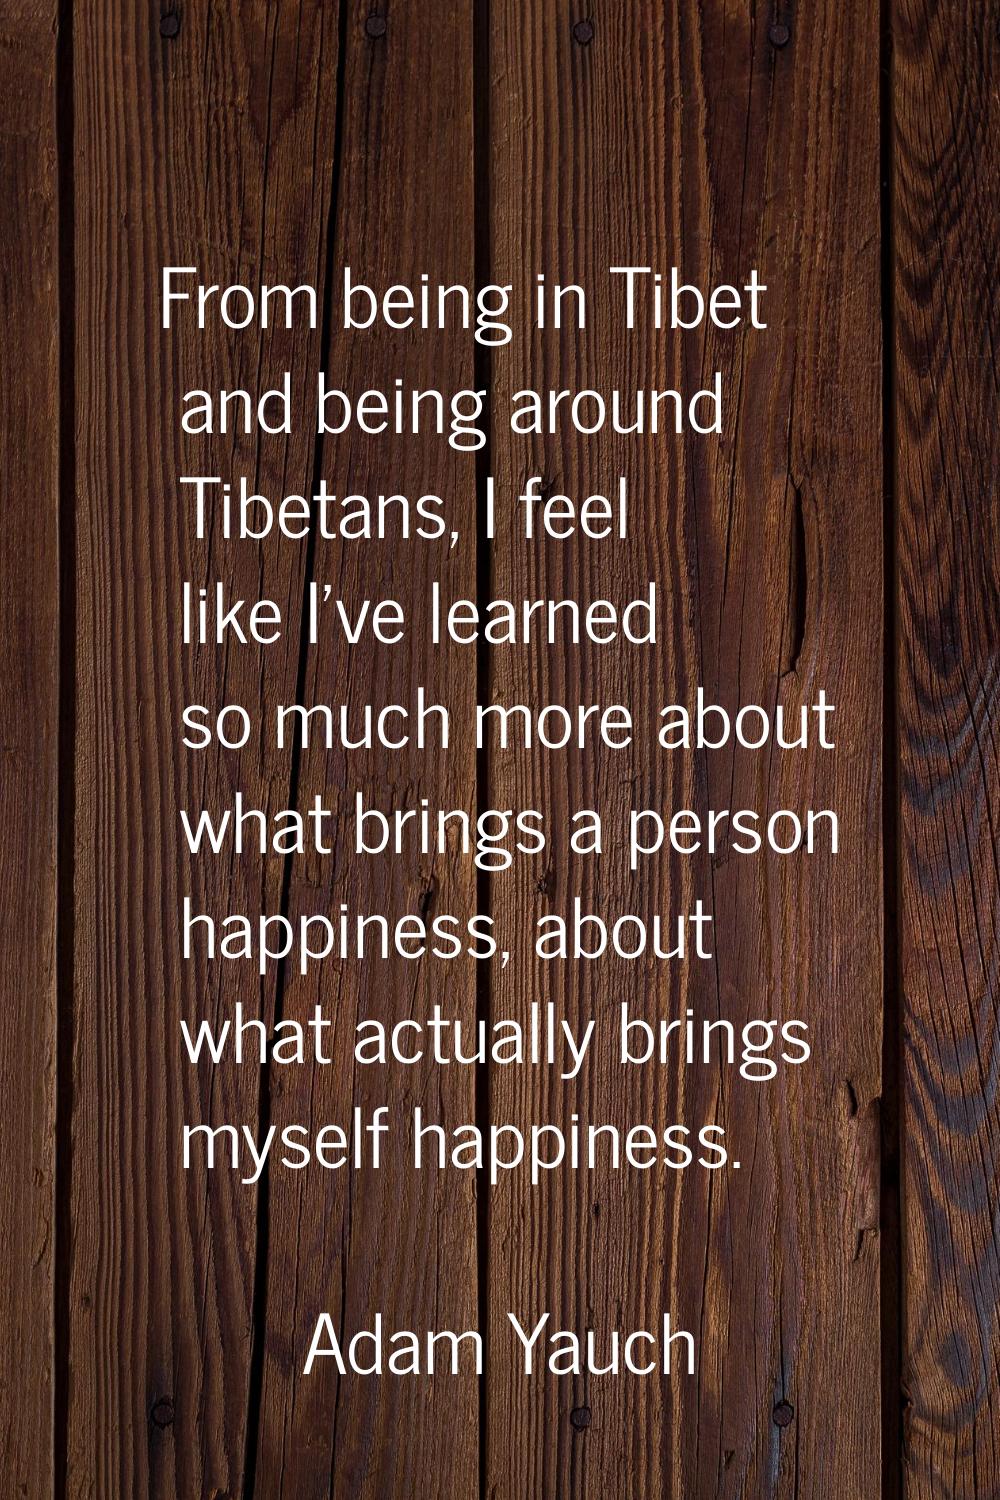 From being in Tibet and being around Tibetans, I feel like I've learned so much more about what bri